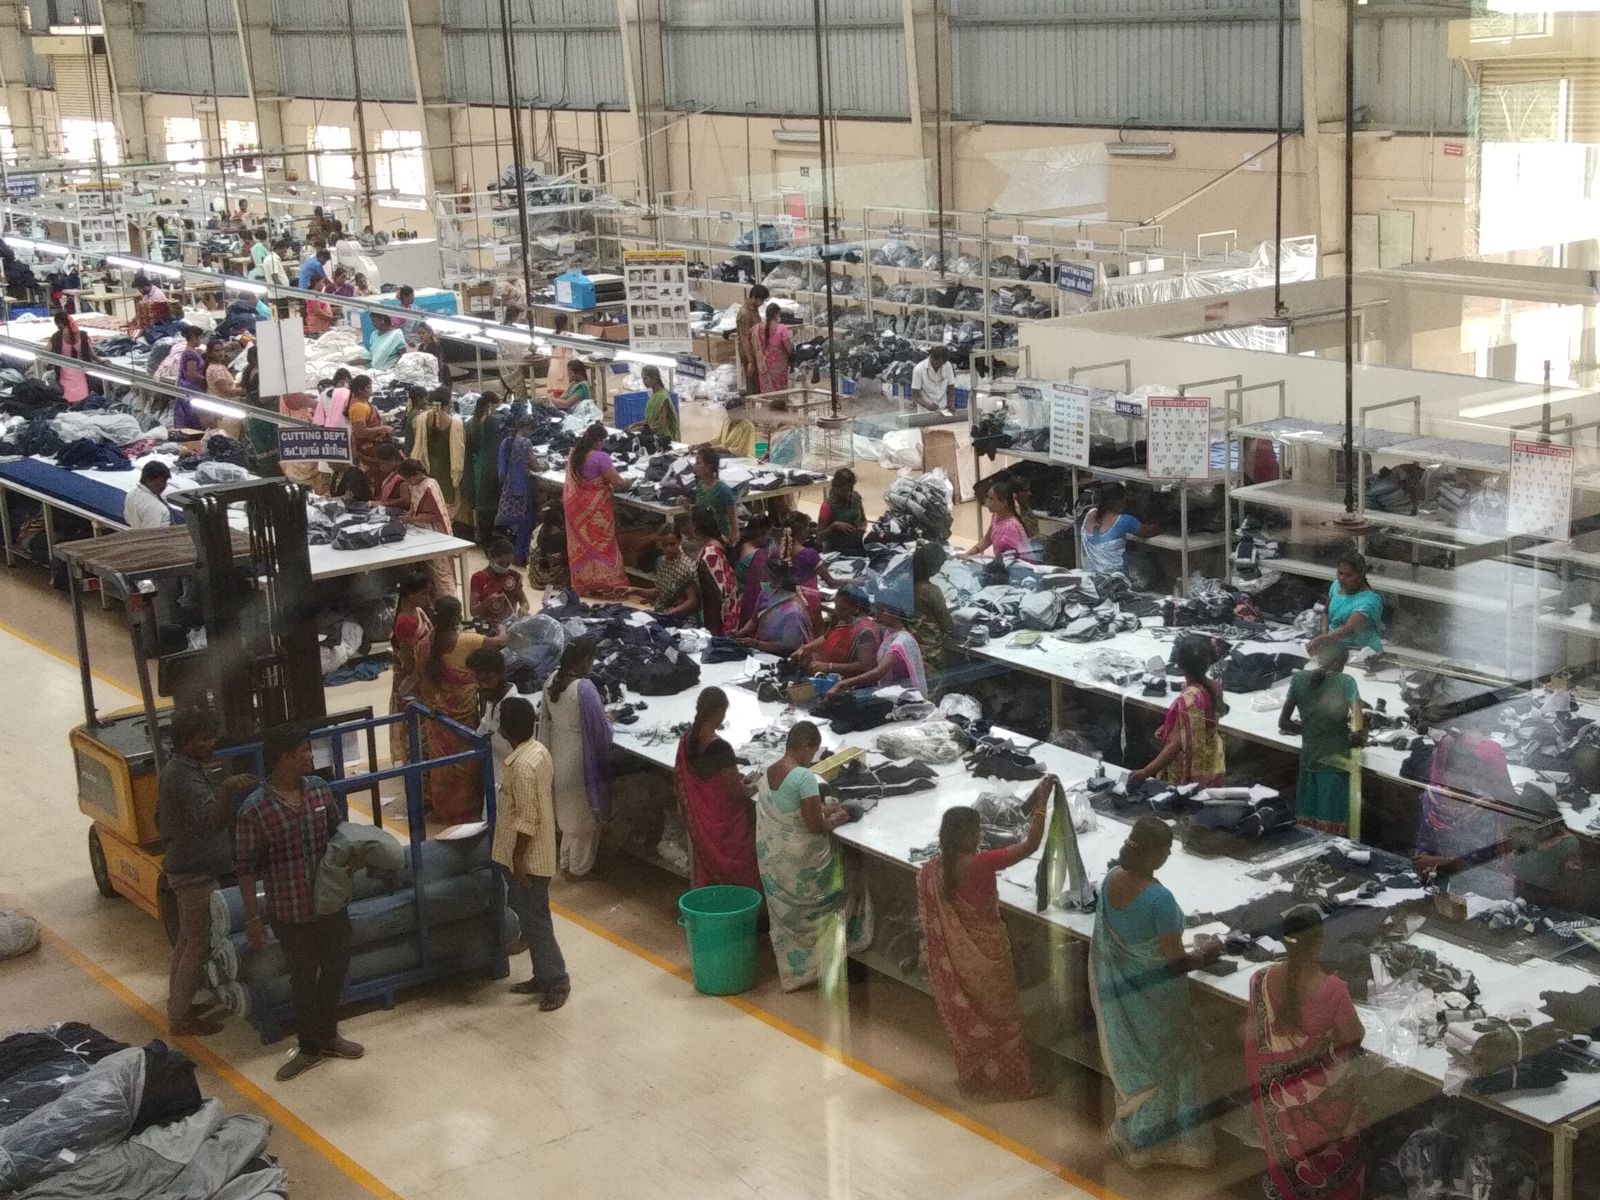 From hardship to hope: women migrant workers in the Indian ready-made garment industry